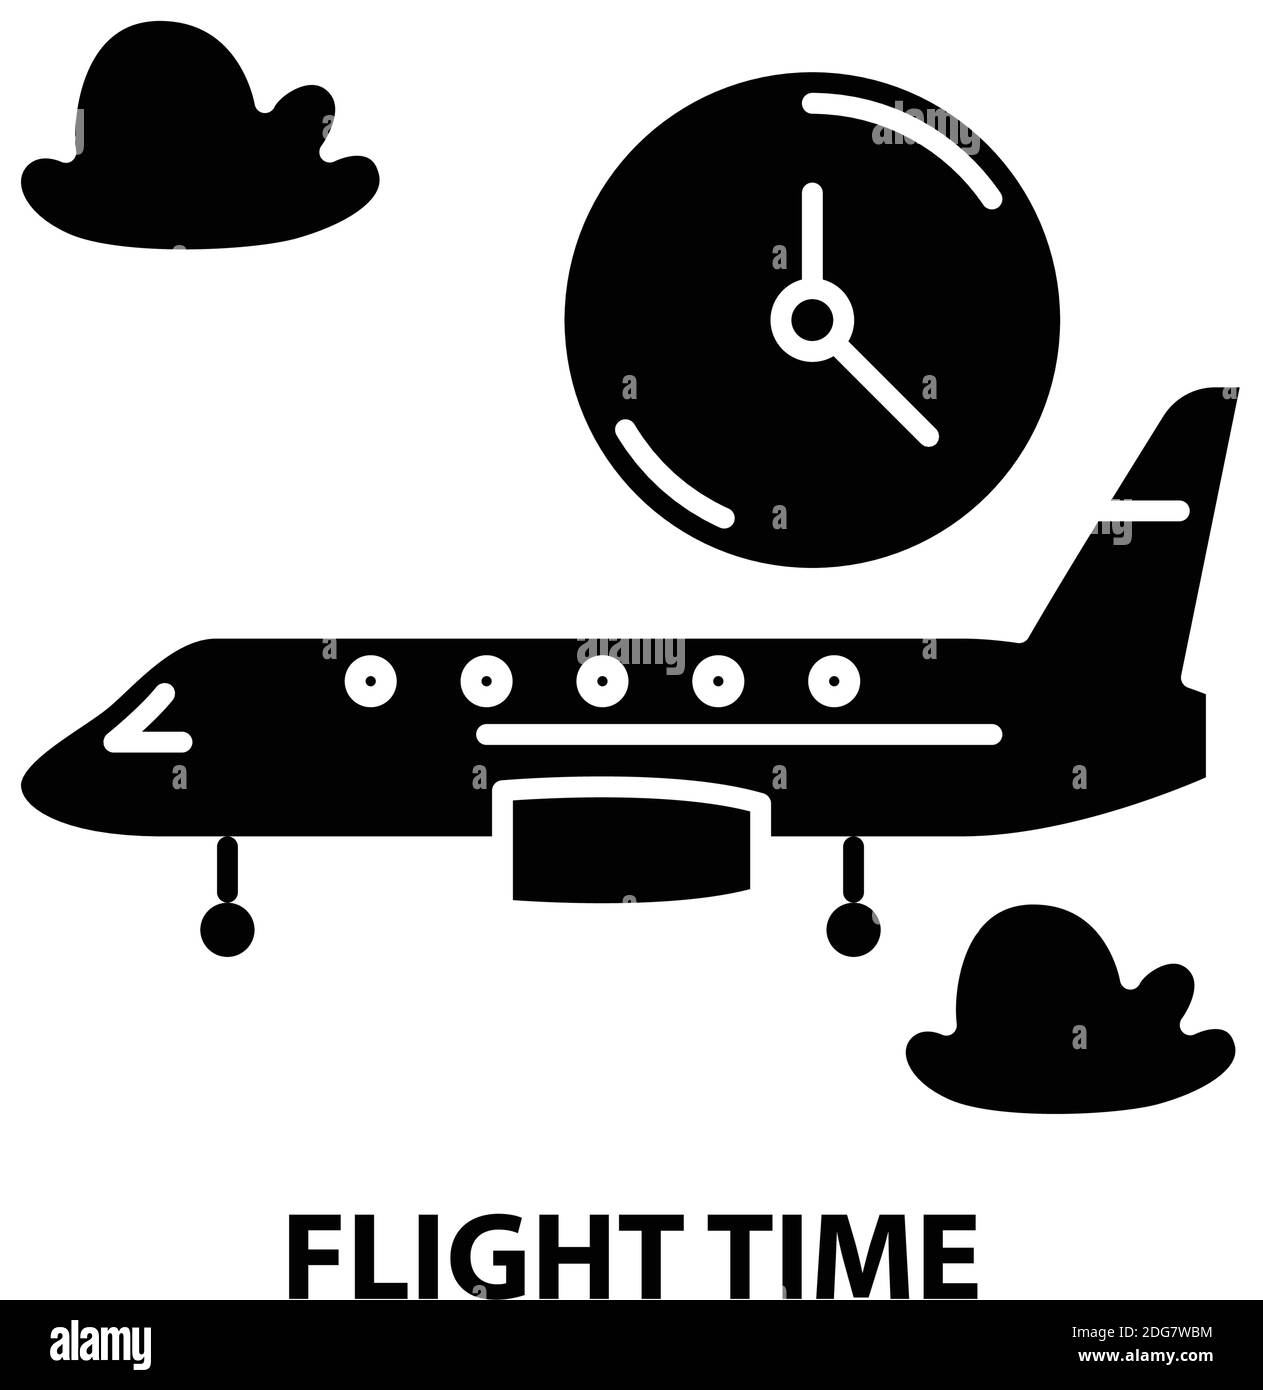 flight time icon, black vector sign with editable strokes, concept illustration Stock Vector